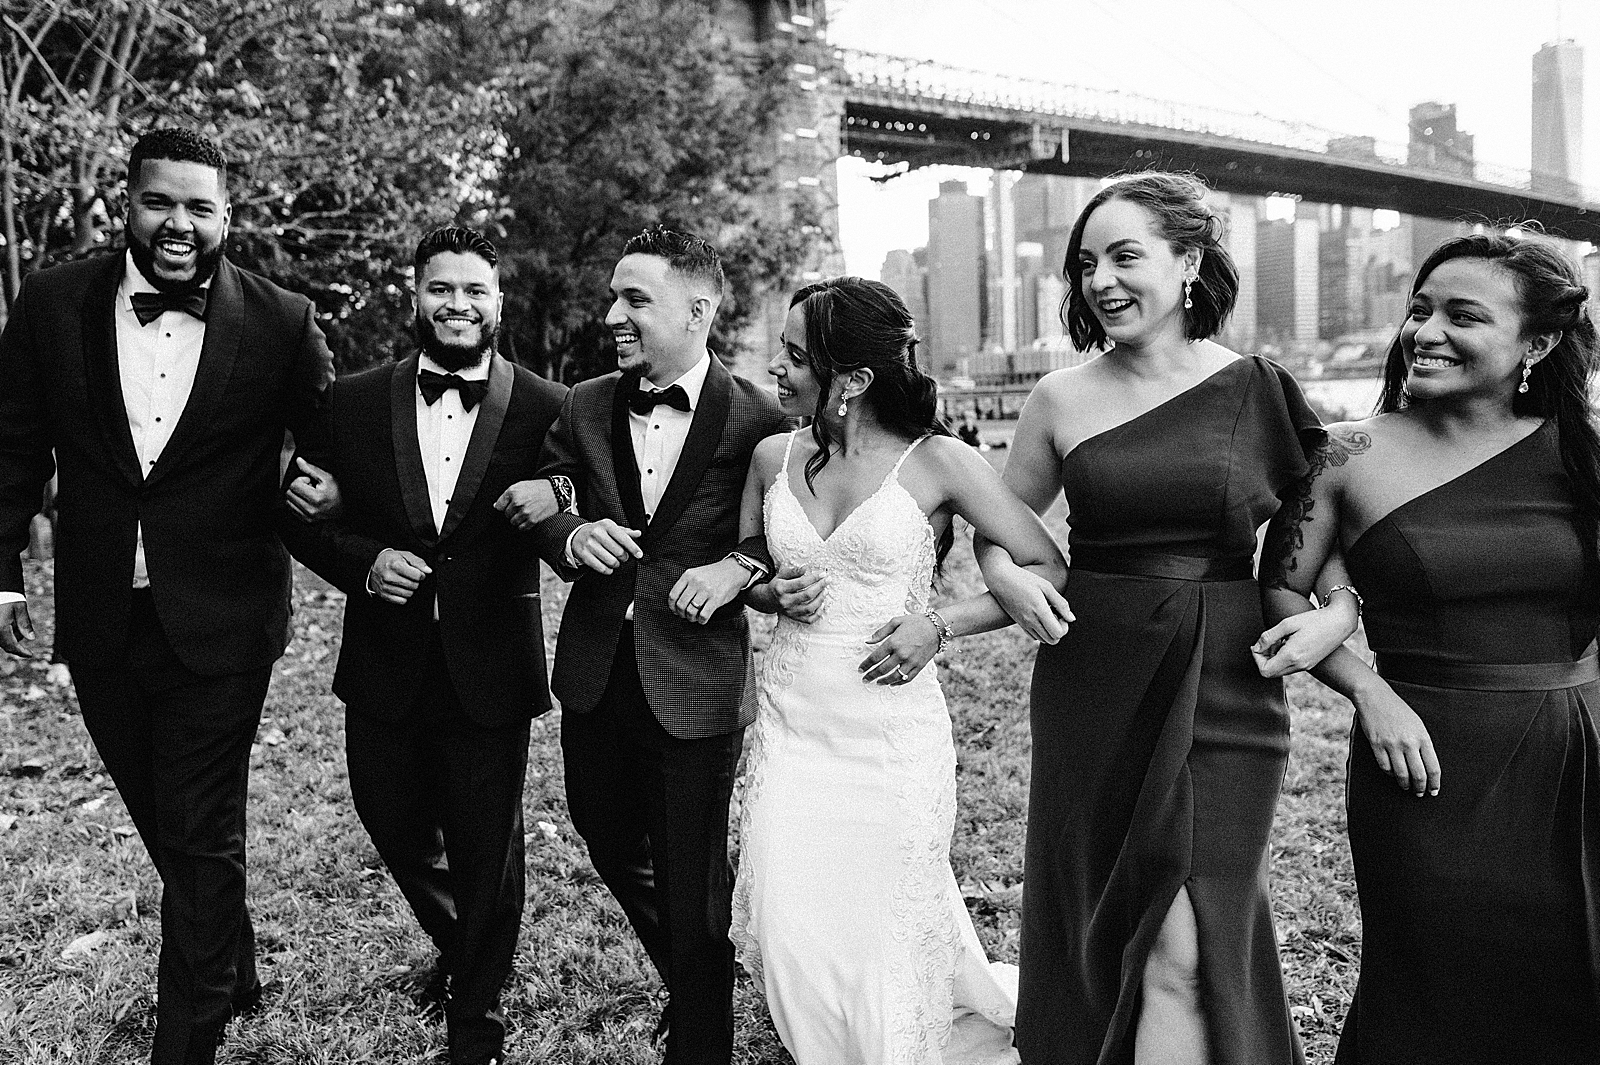 B&W Bride and Groom arm in arm with wedding party smiling